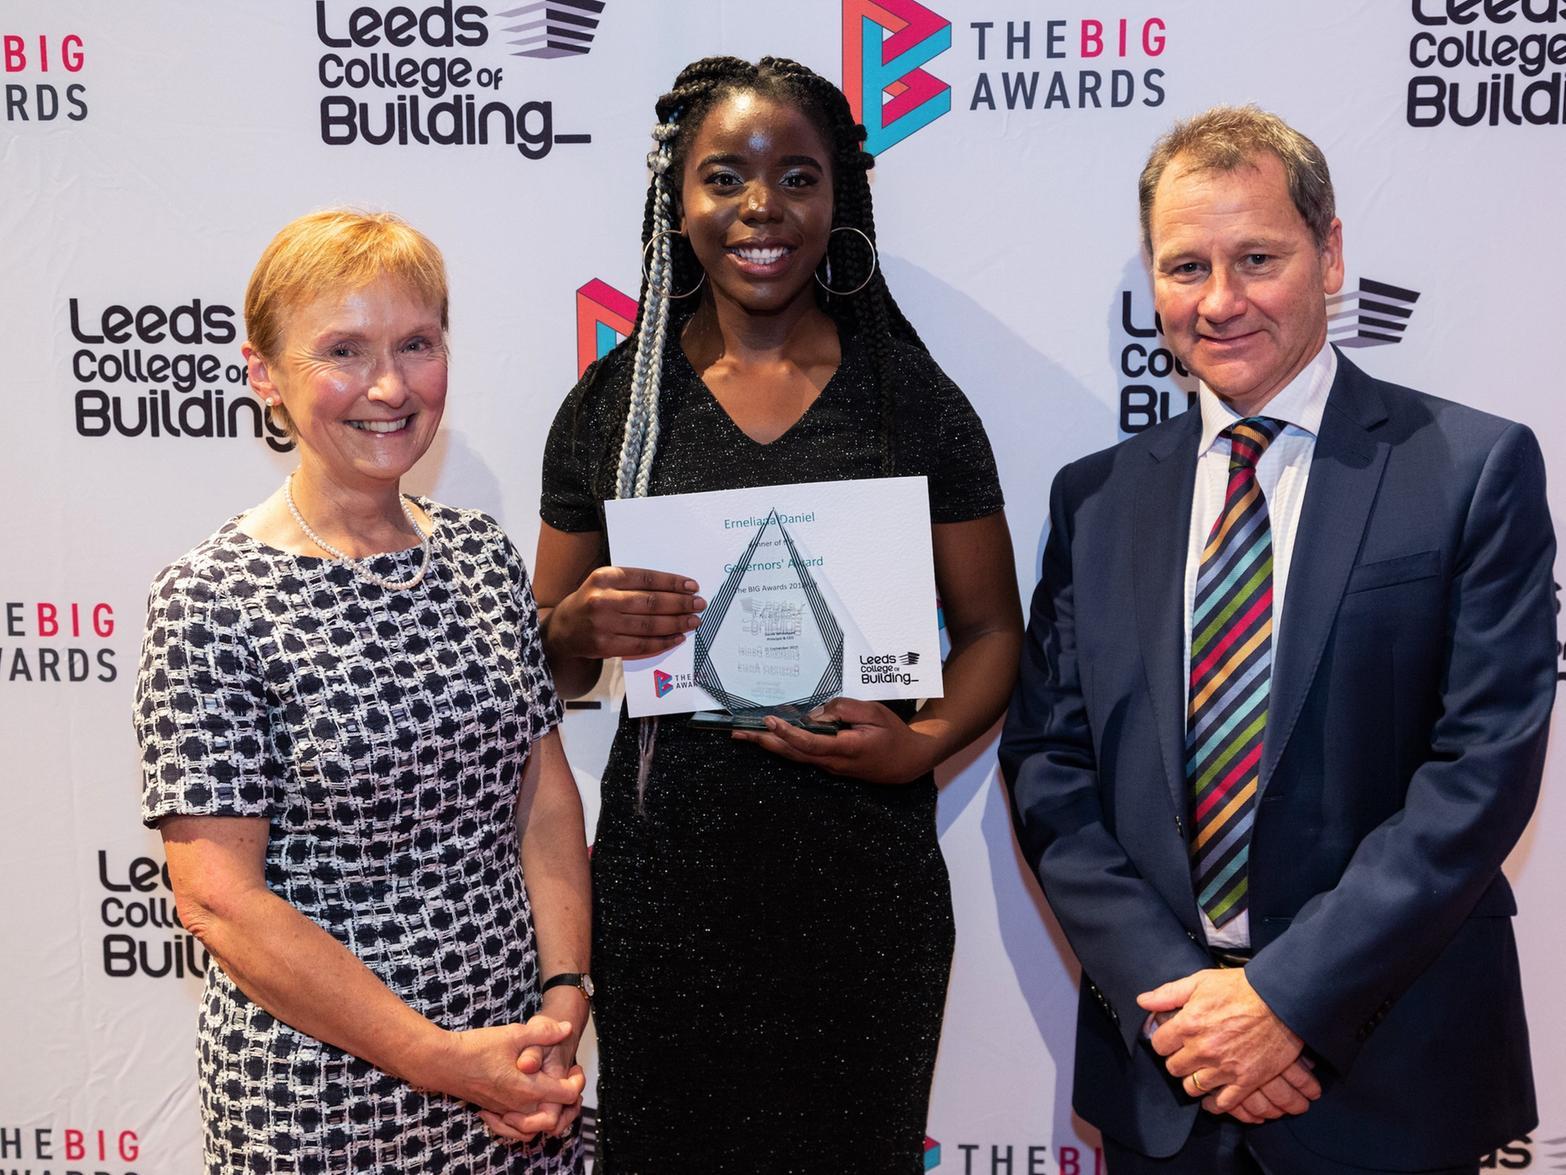 Julia Evans (Chair, Board of Governors), Erneliana Daniel (student and Governors award-winner), and Derek Whitehead (Principal) at the recent Leeds College of Building annual BIG Awards.